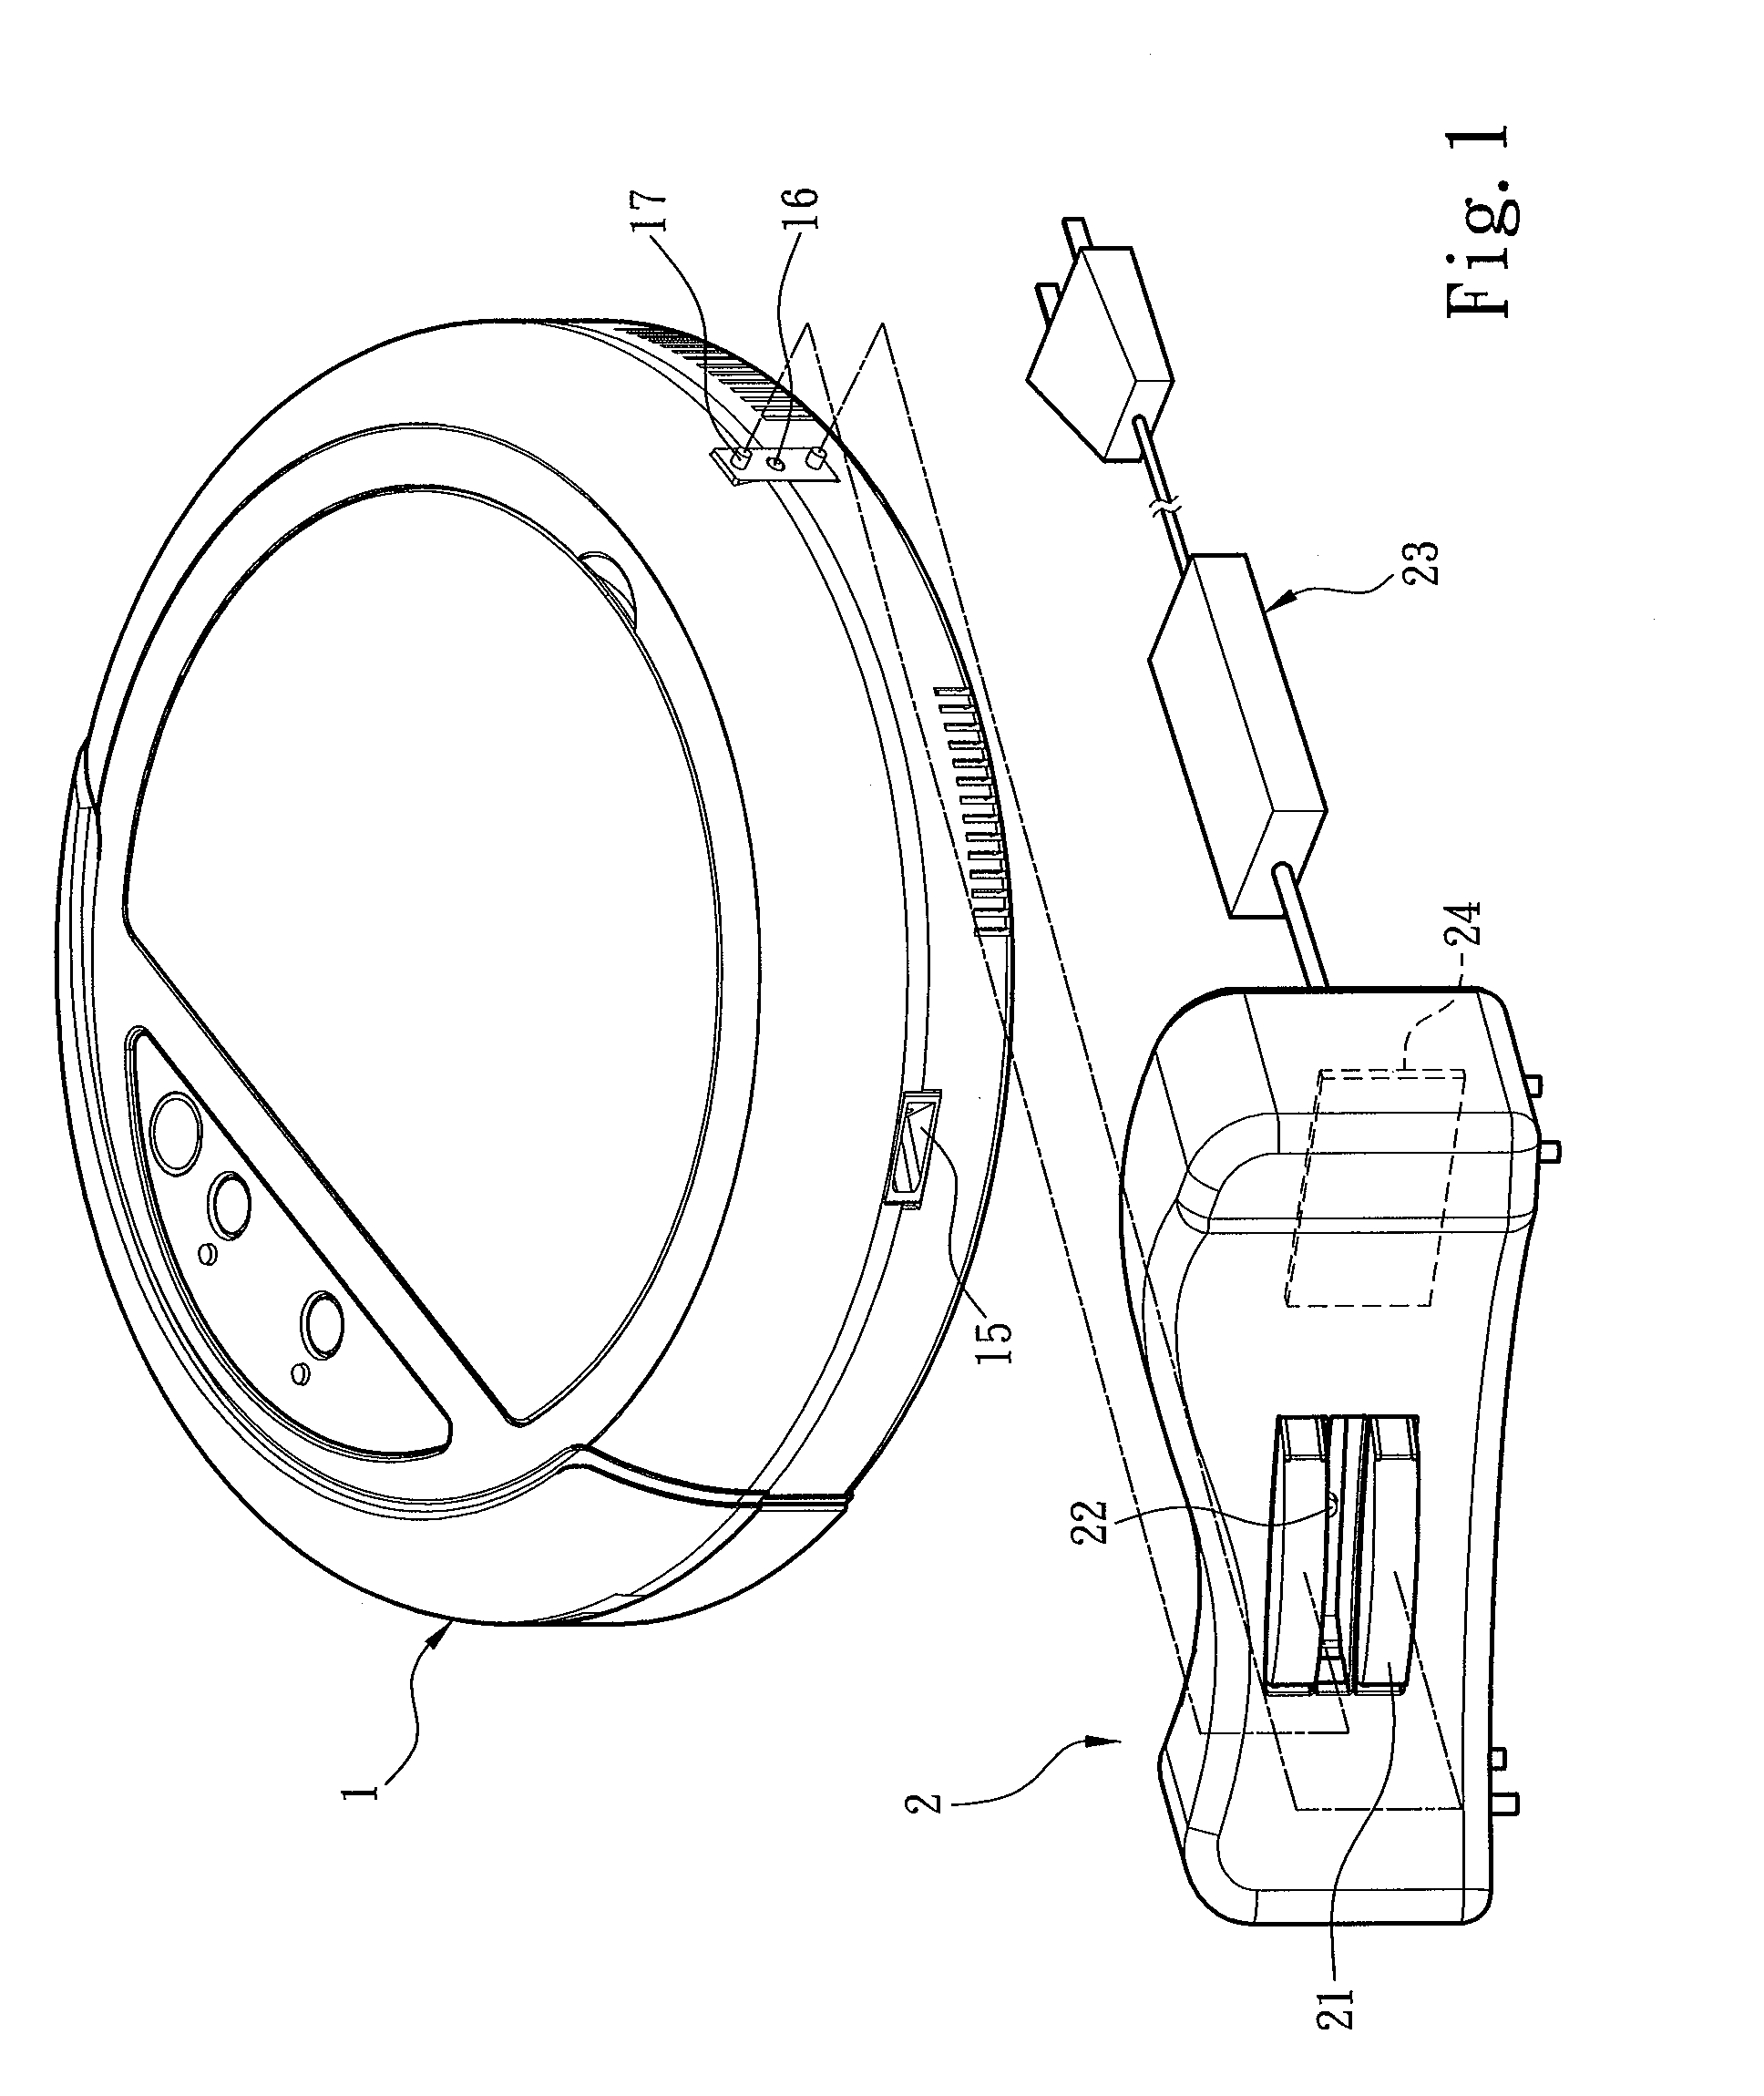 Automatic homing and charging method for self-moving cleaning apparatus